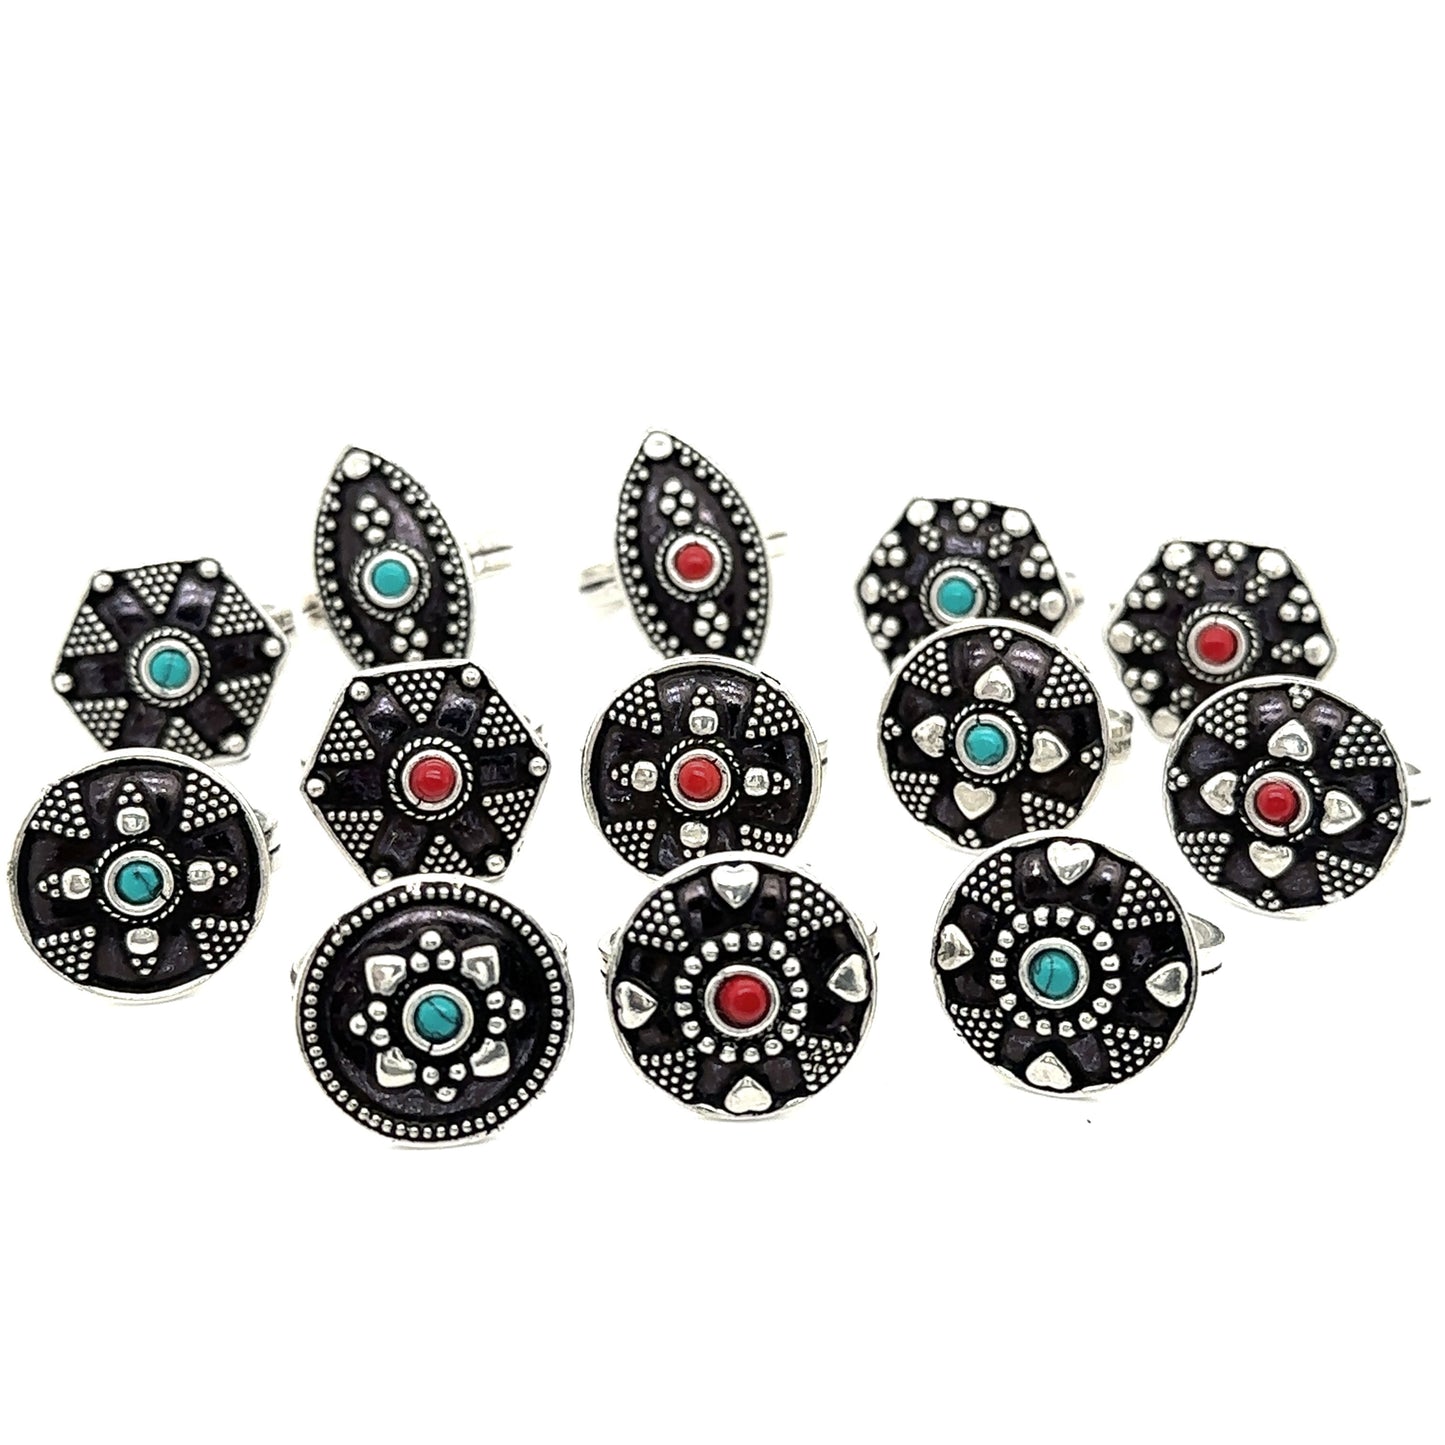 A stunning Tibetan-Style Rings with Small Stones set adorned with turquoise and black stones.